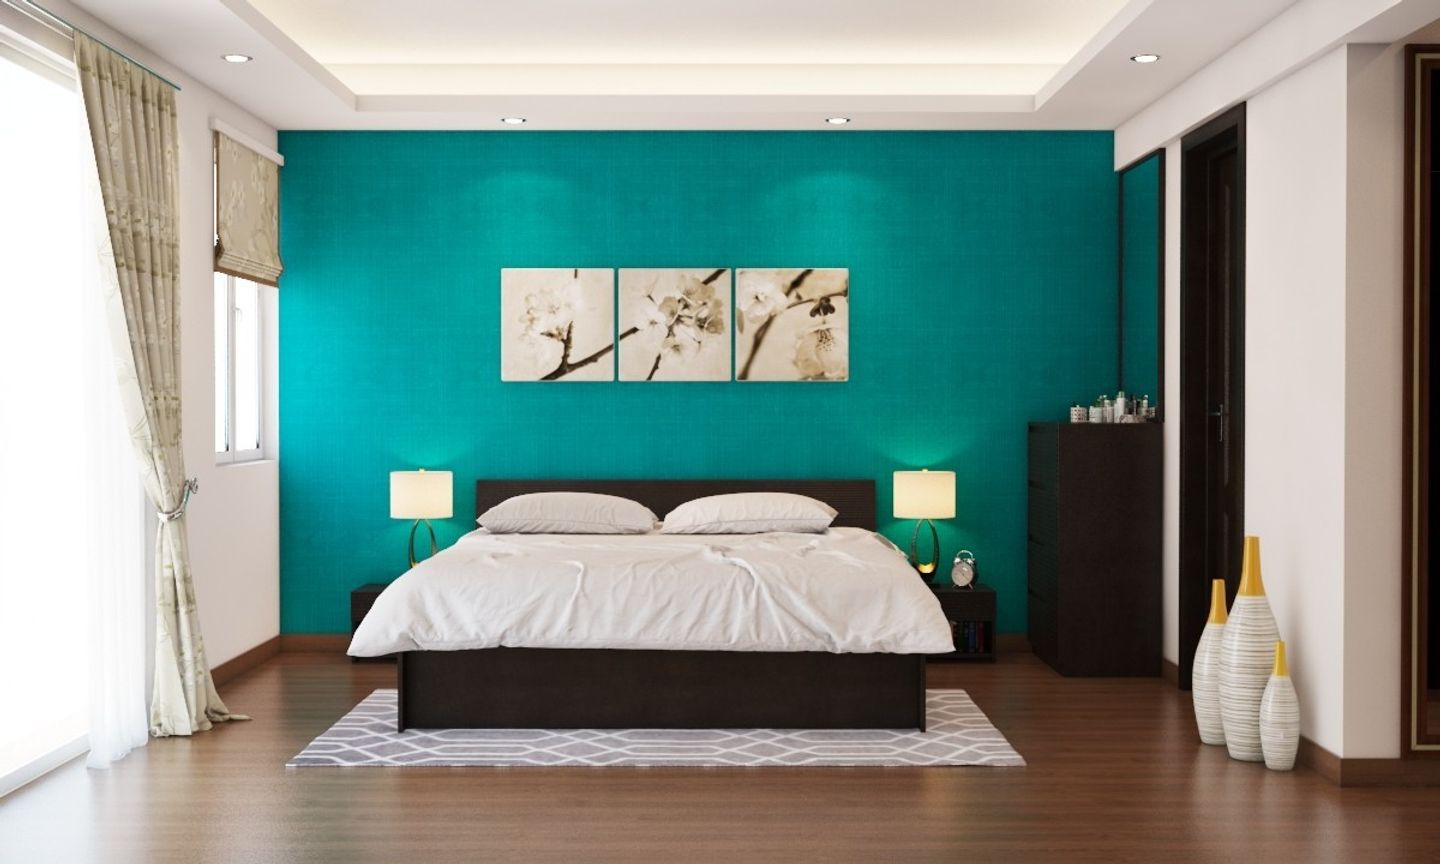 Spacious Guest Bedroom Design With Wallpaint